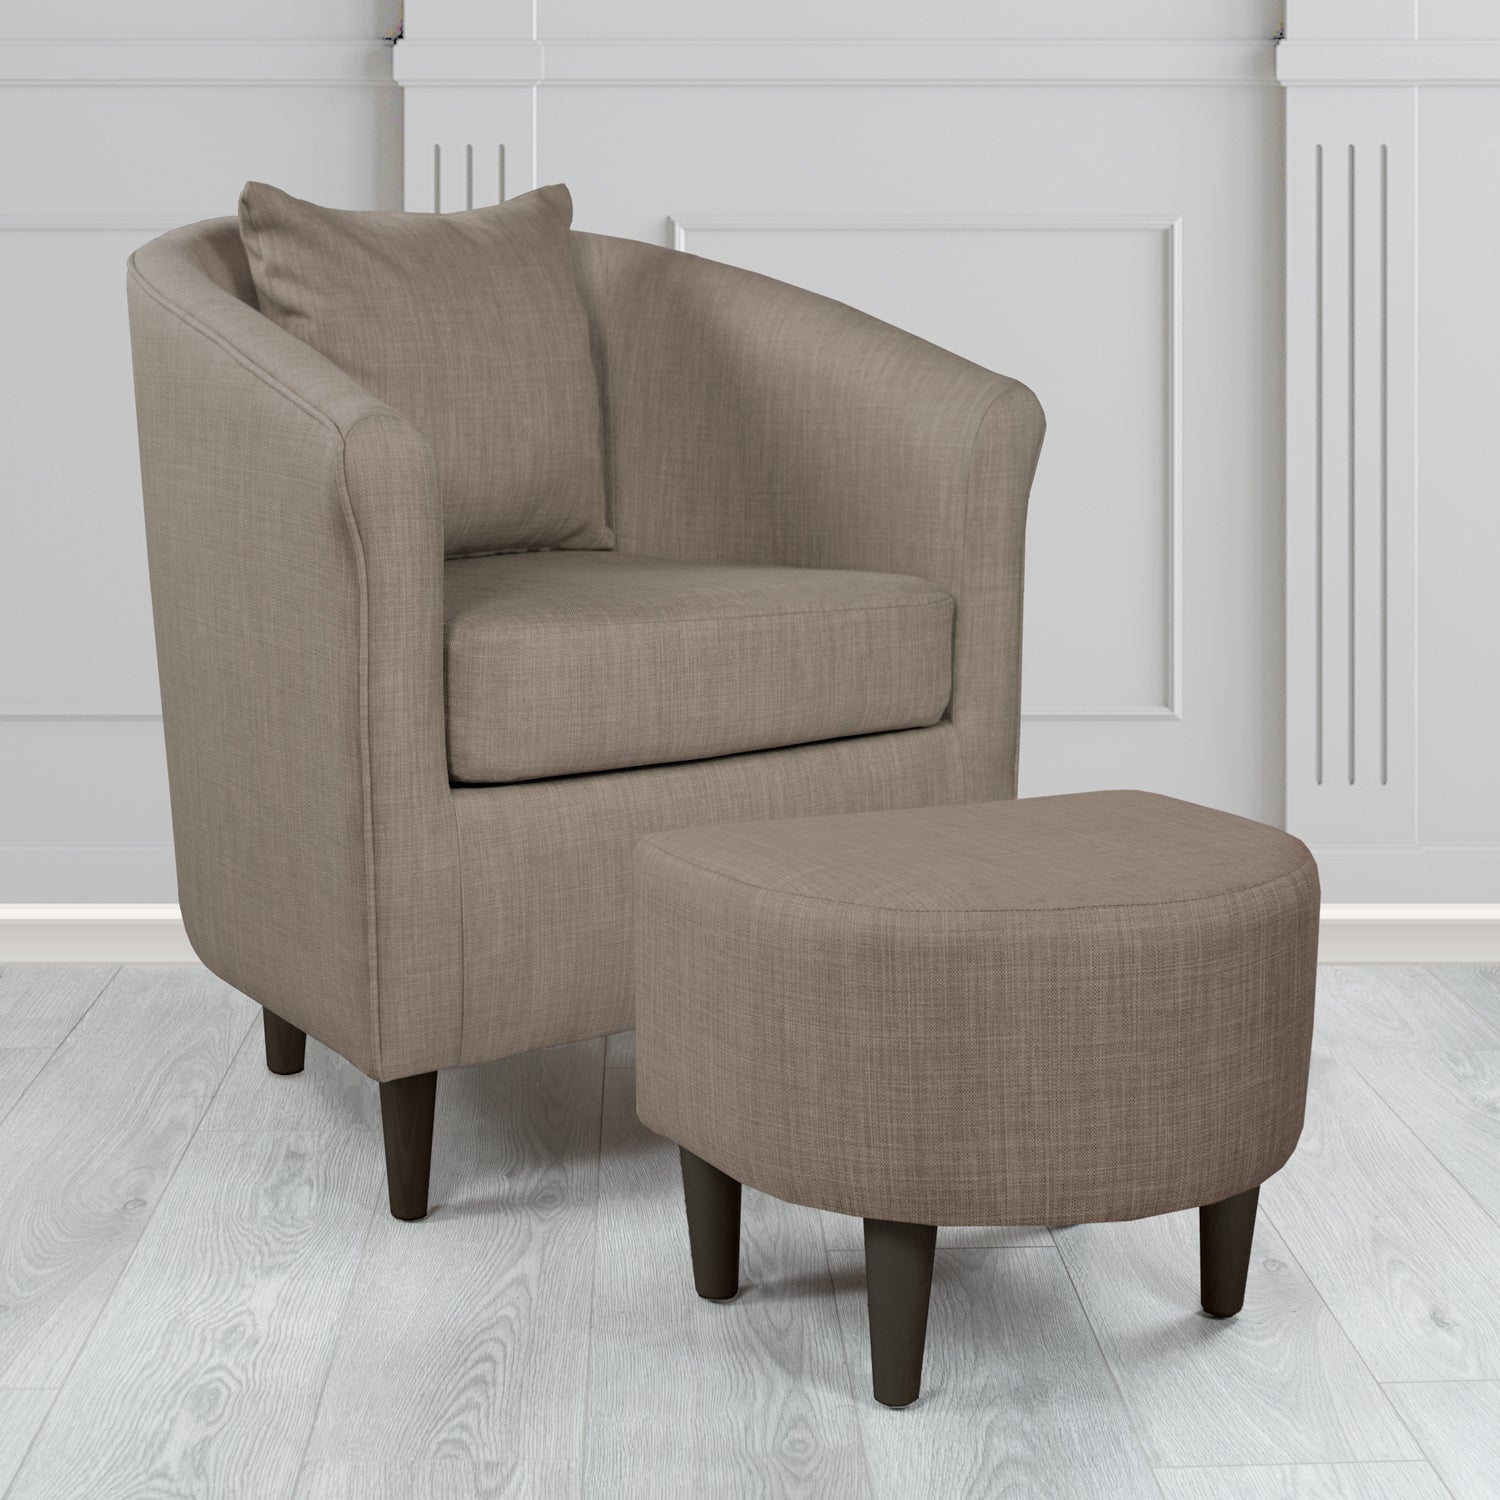 St Tropez Charles Slate Plain Linen Fabric Tub Chair & Footstool Set with Scatter Cushion - The Tub Chair Shop